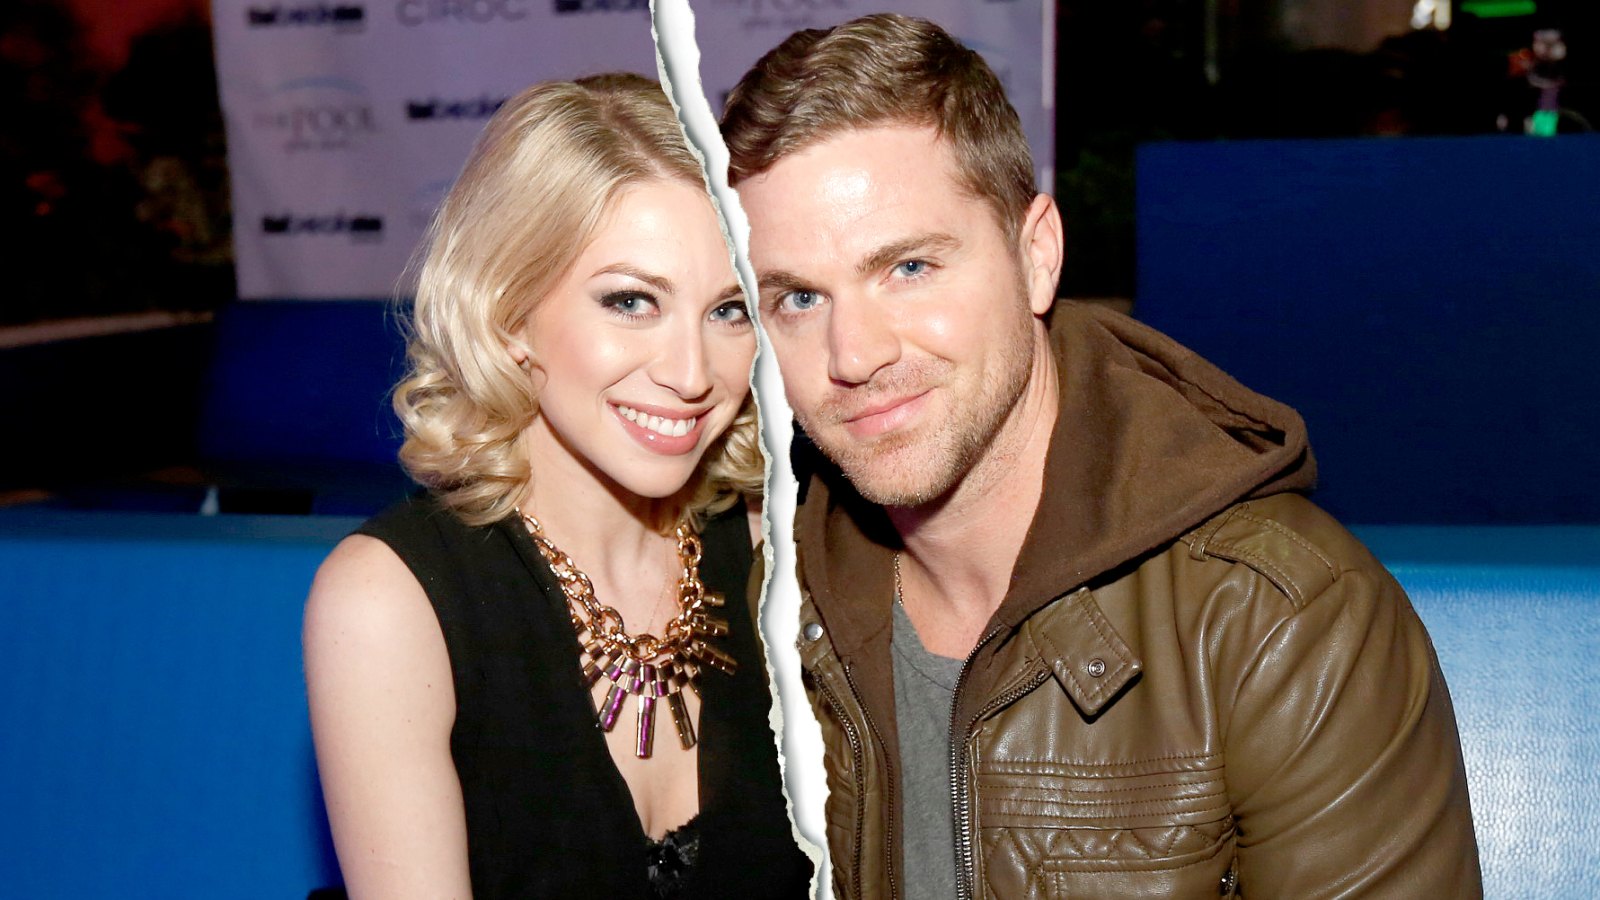 Stassi Schroeder and Patrick Meagher